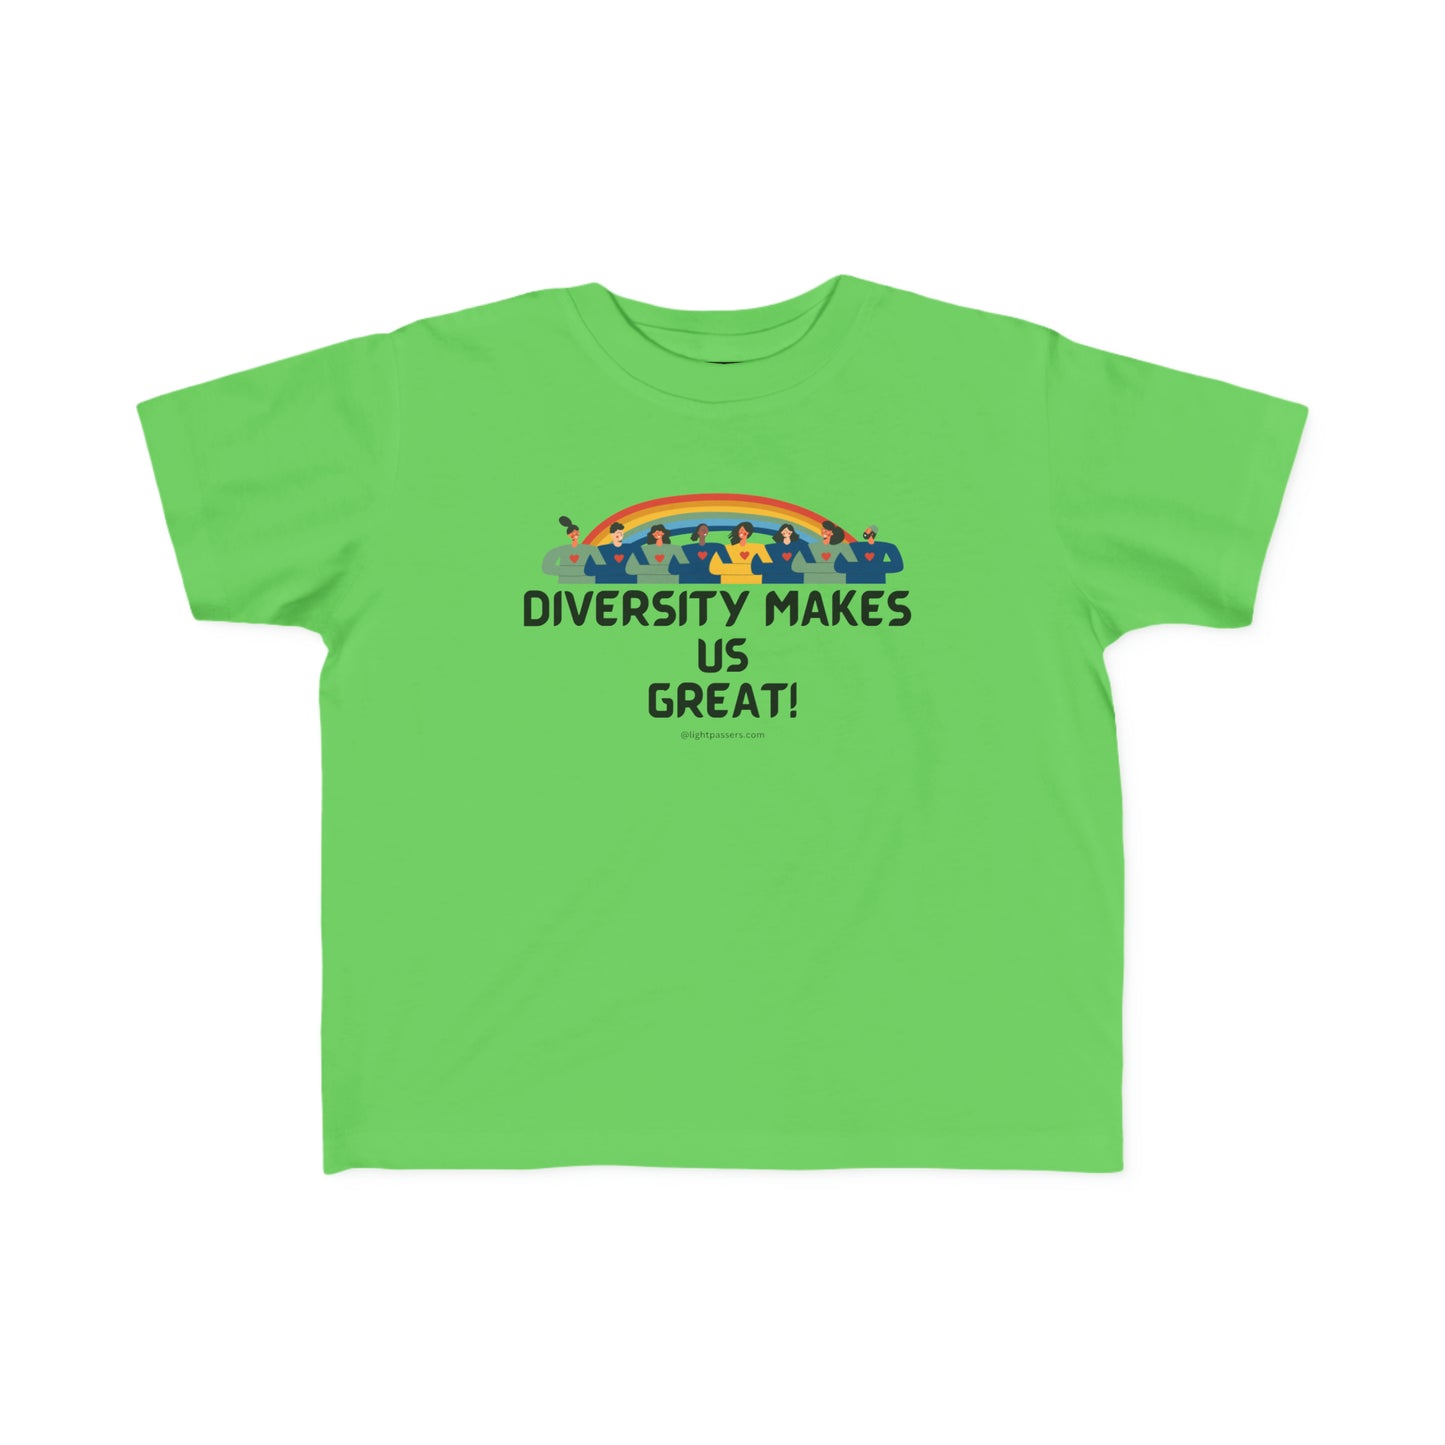 Light Passers Marketplace "Diversity Makes Us Great" Toddler Fine Jersey T-shirt Simple Messages, Diversity, Mental Health